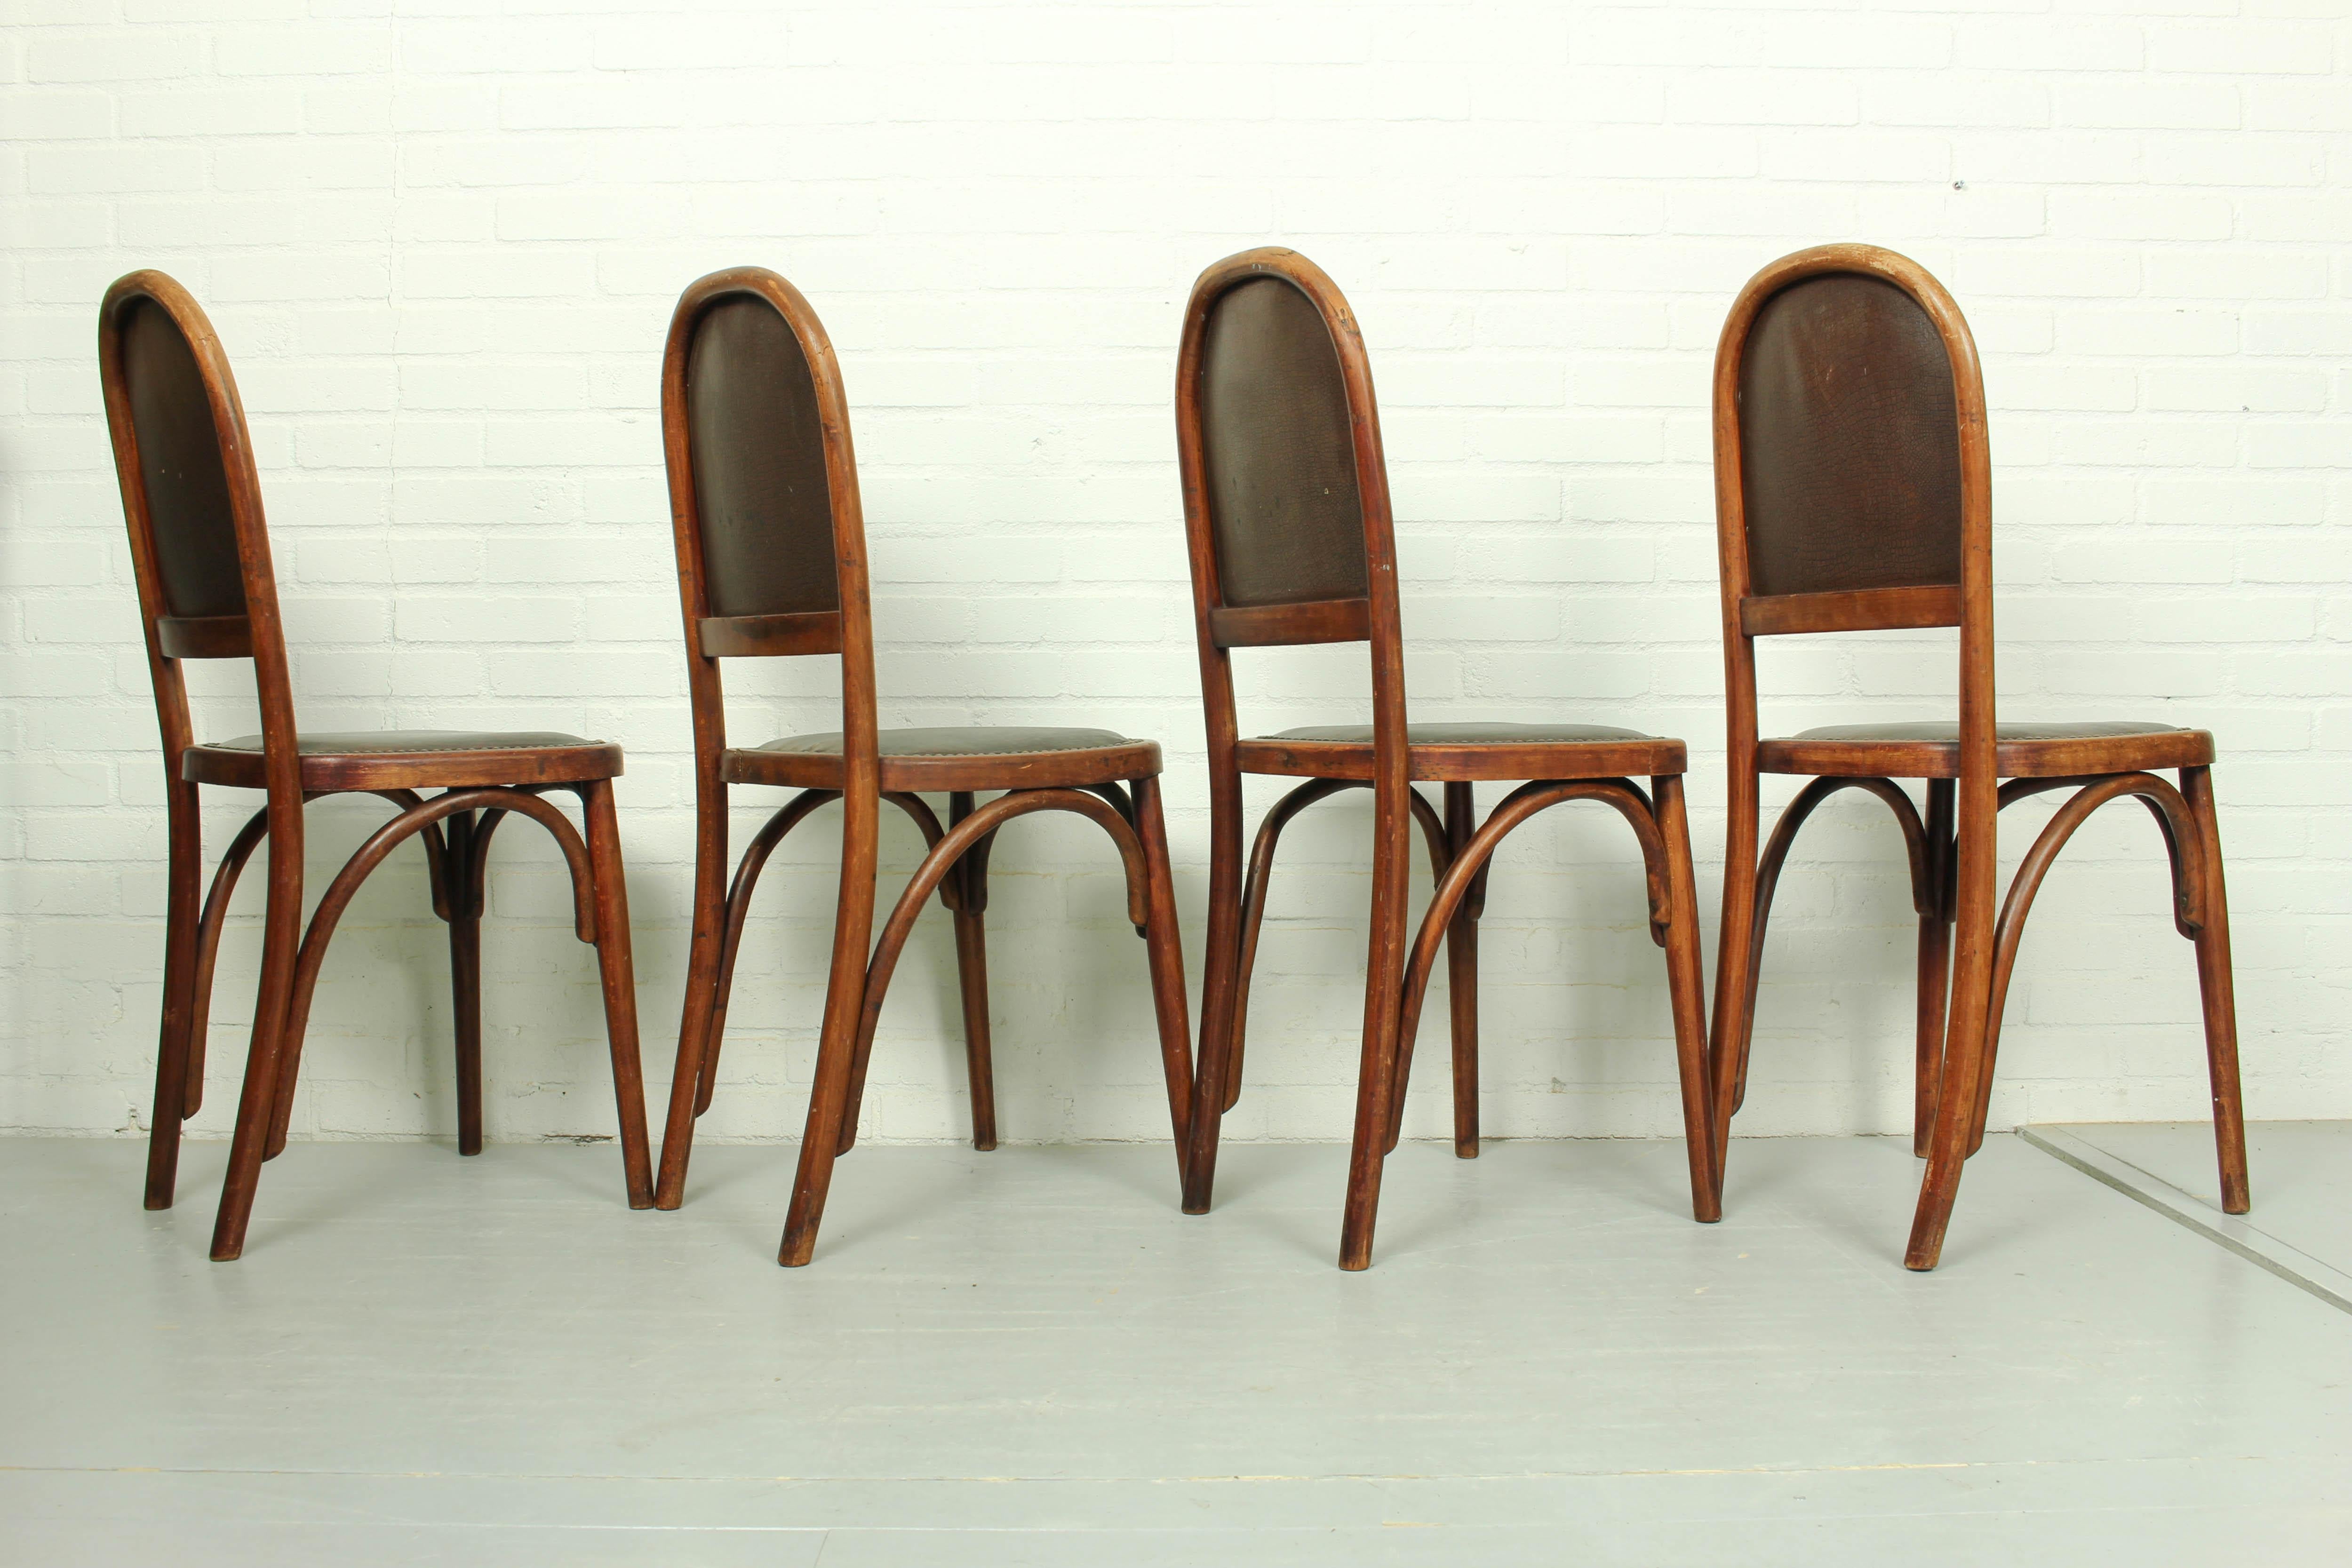  Art Nouveau Bentwood and Leather Dining Room Set from Fischel, c1910 In Good Condition For Sale In Appeltern, Gelderland